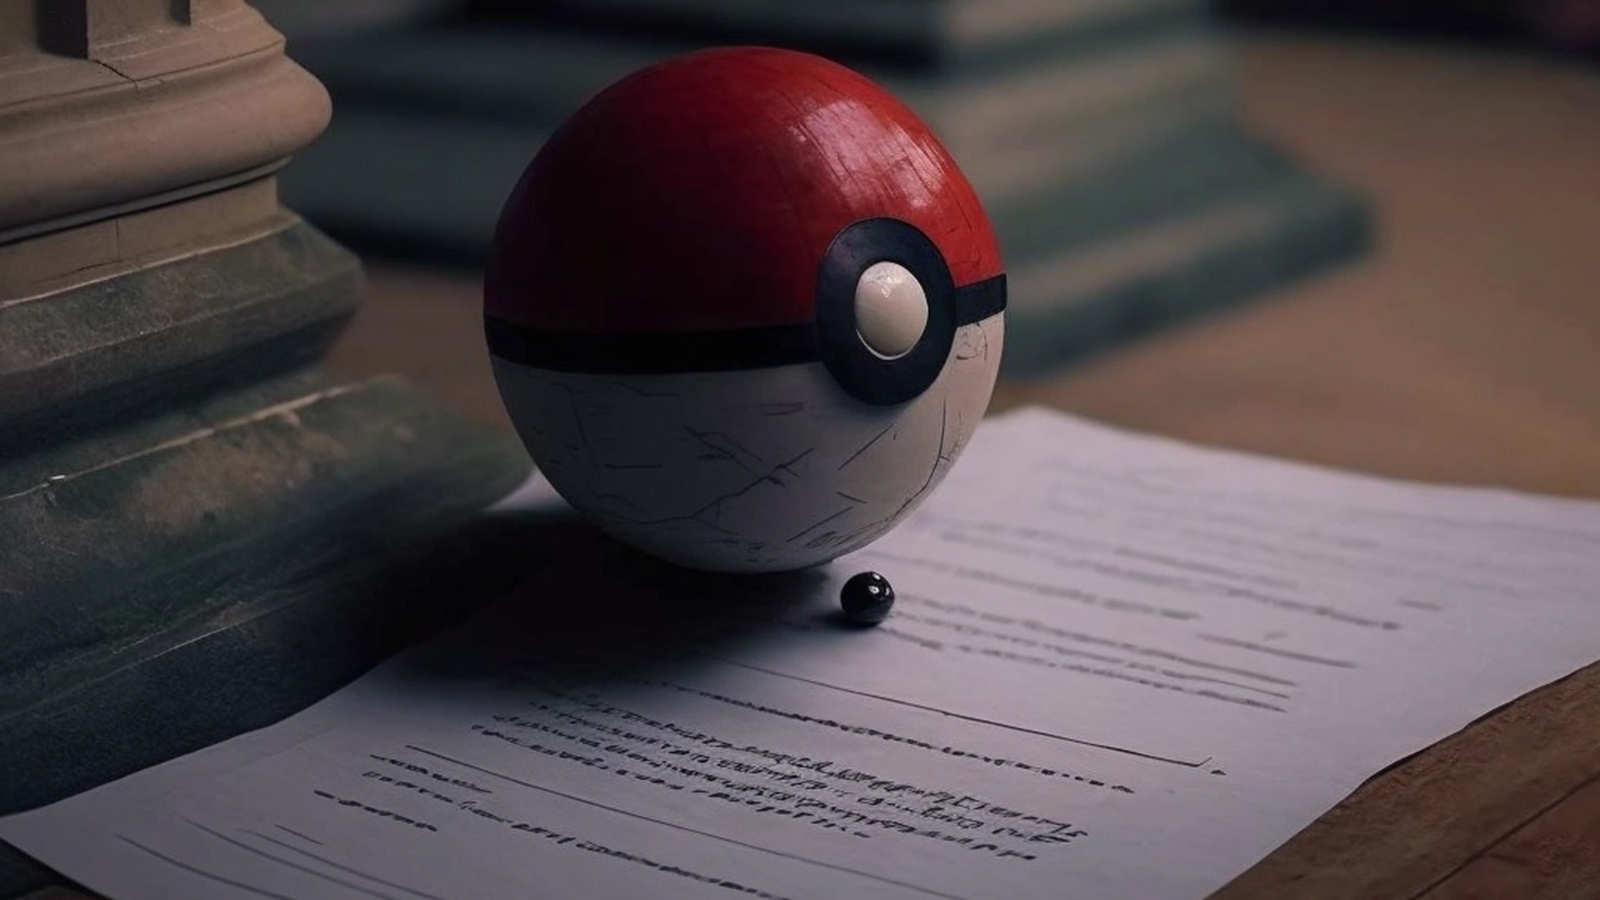 Pokemon Go petition to “Save Remote Raiding” signed by thousands ahead of boycott – Dexerto